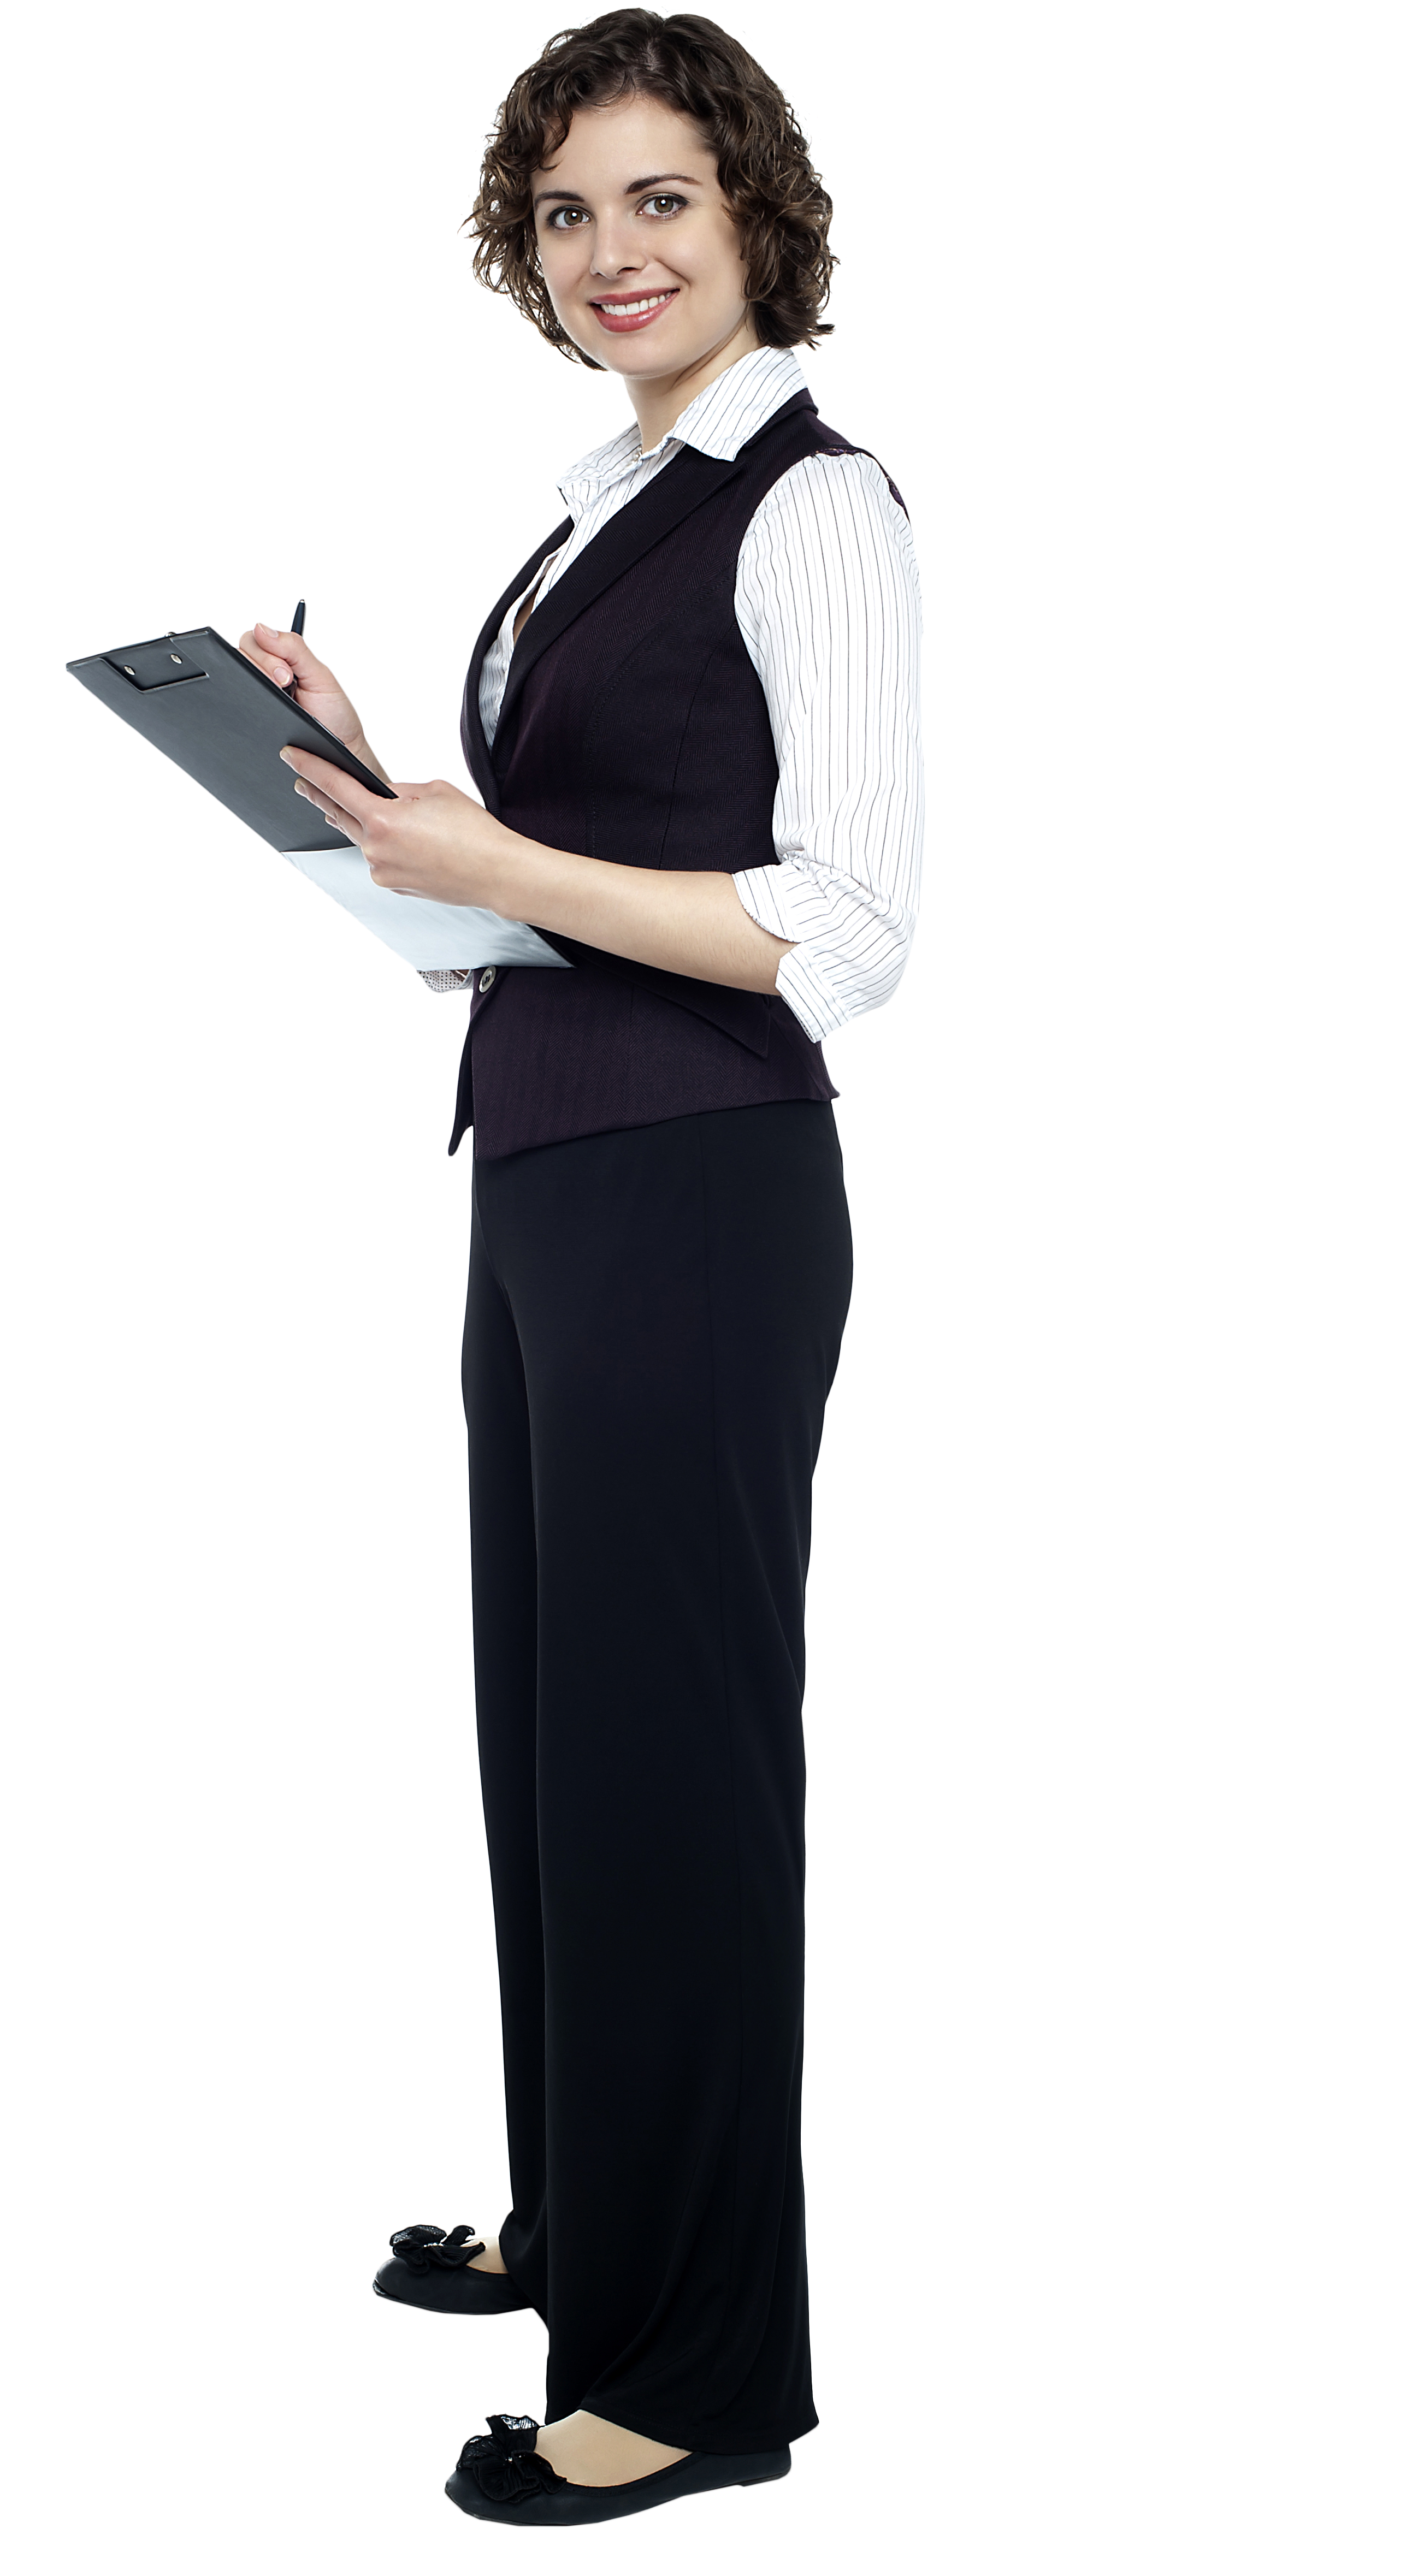 Professional Woman Holding Clipboard PNG image